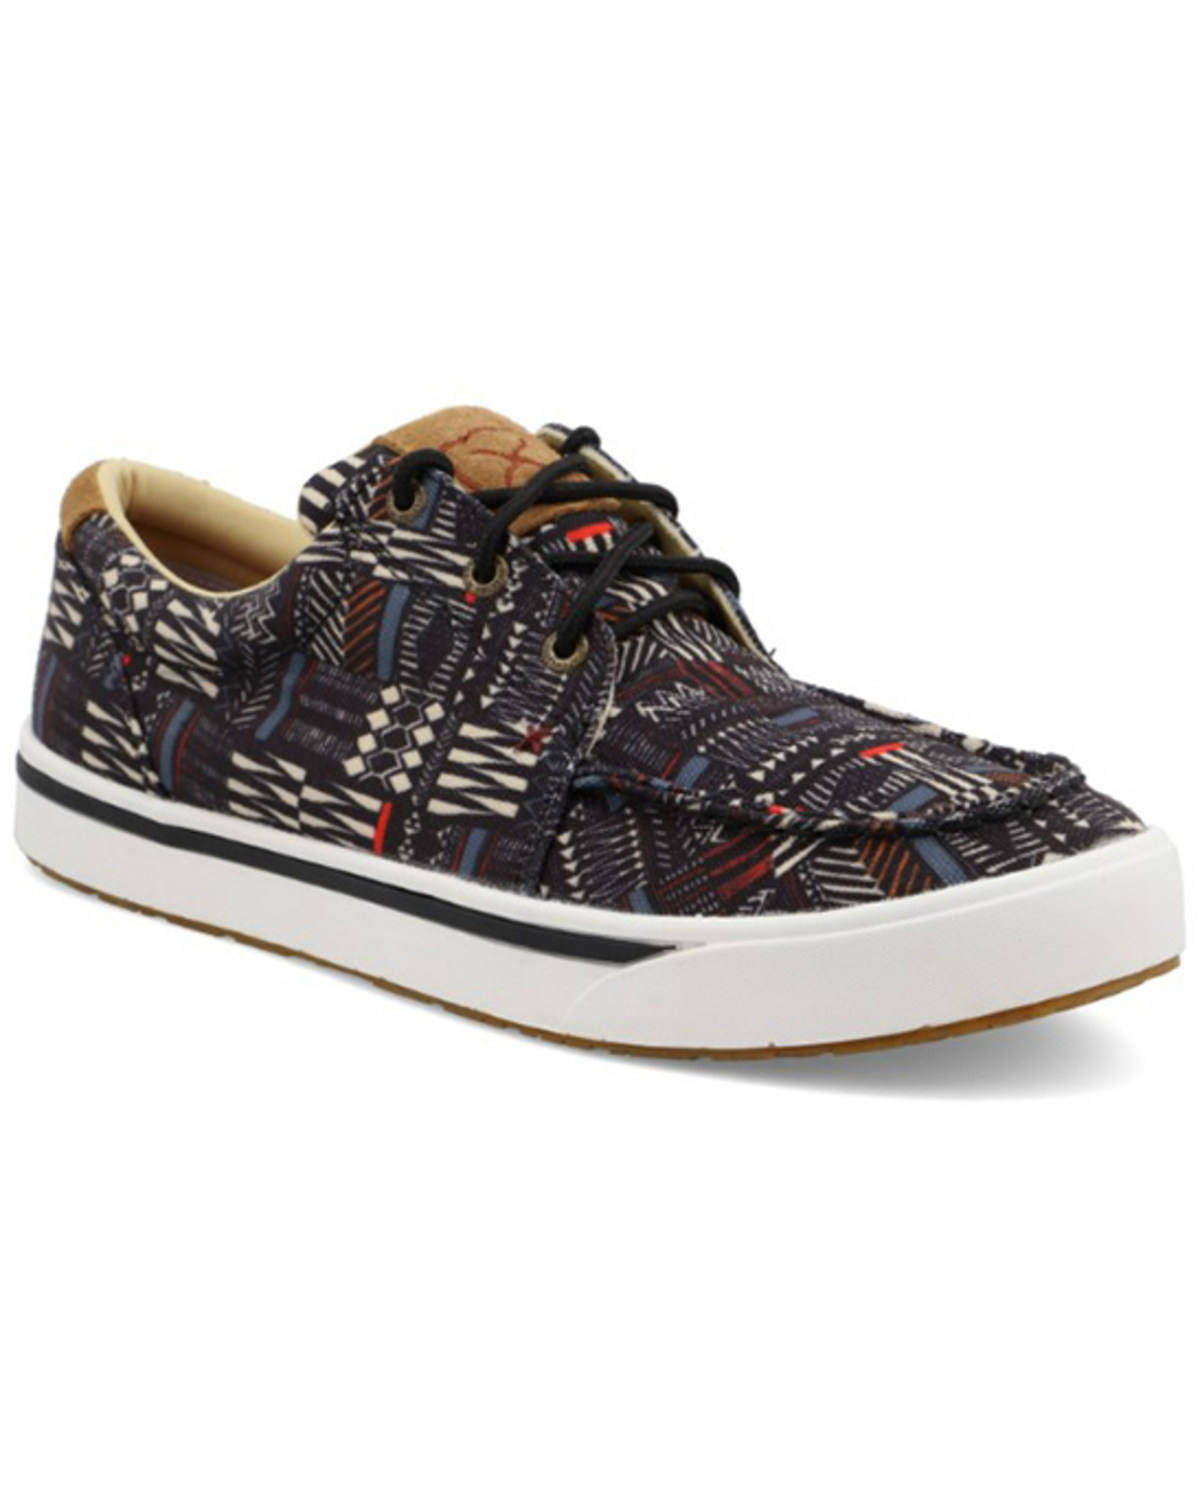 Twisted X Men's Multi Allover Print Kick Lace-Up Causal Shoe